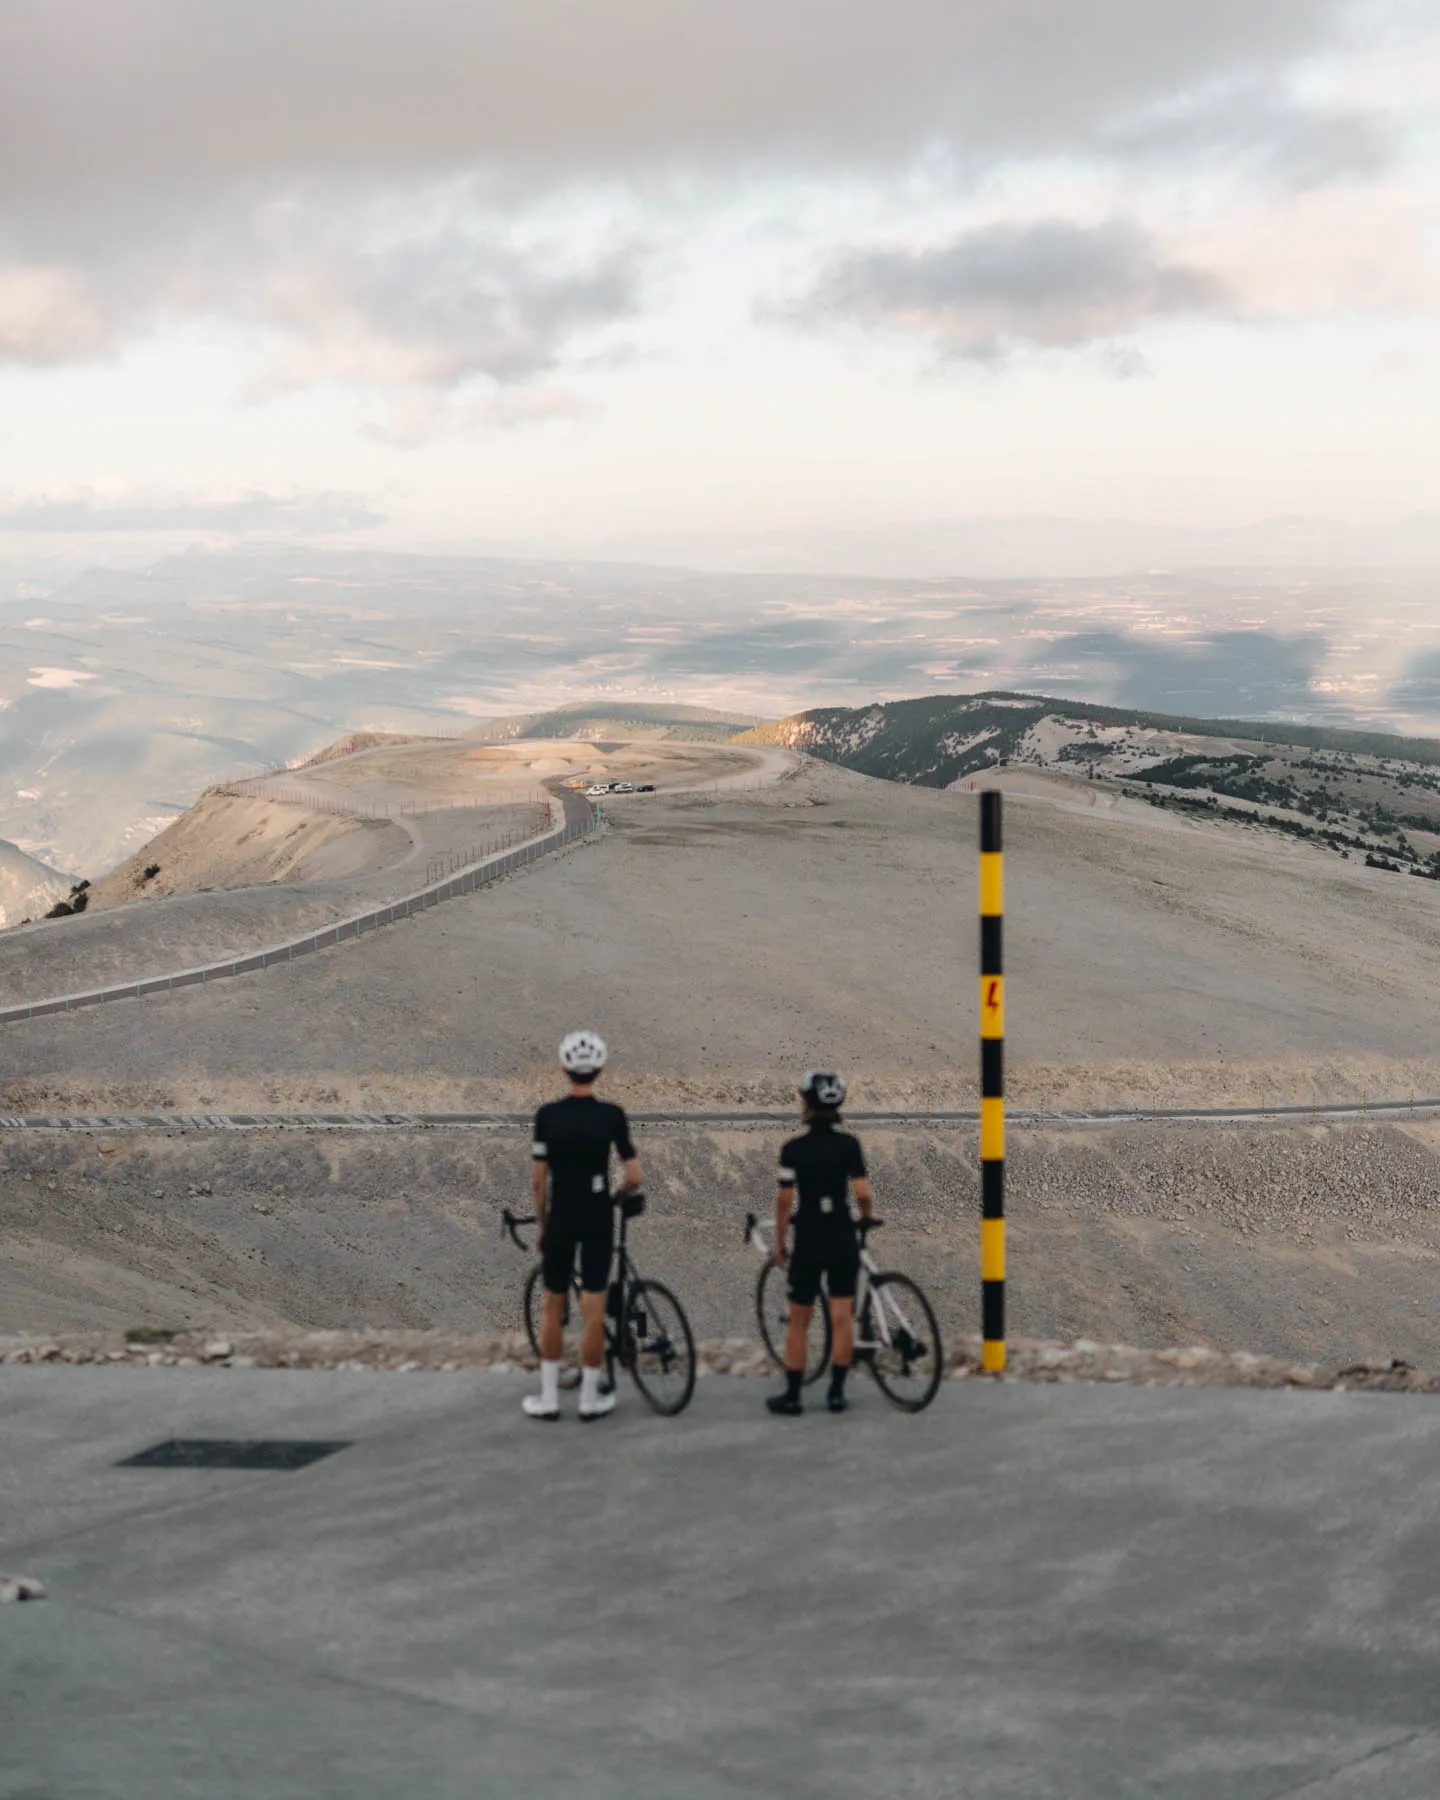 Mount Ventoux Climb - The View From Peak